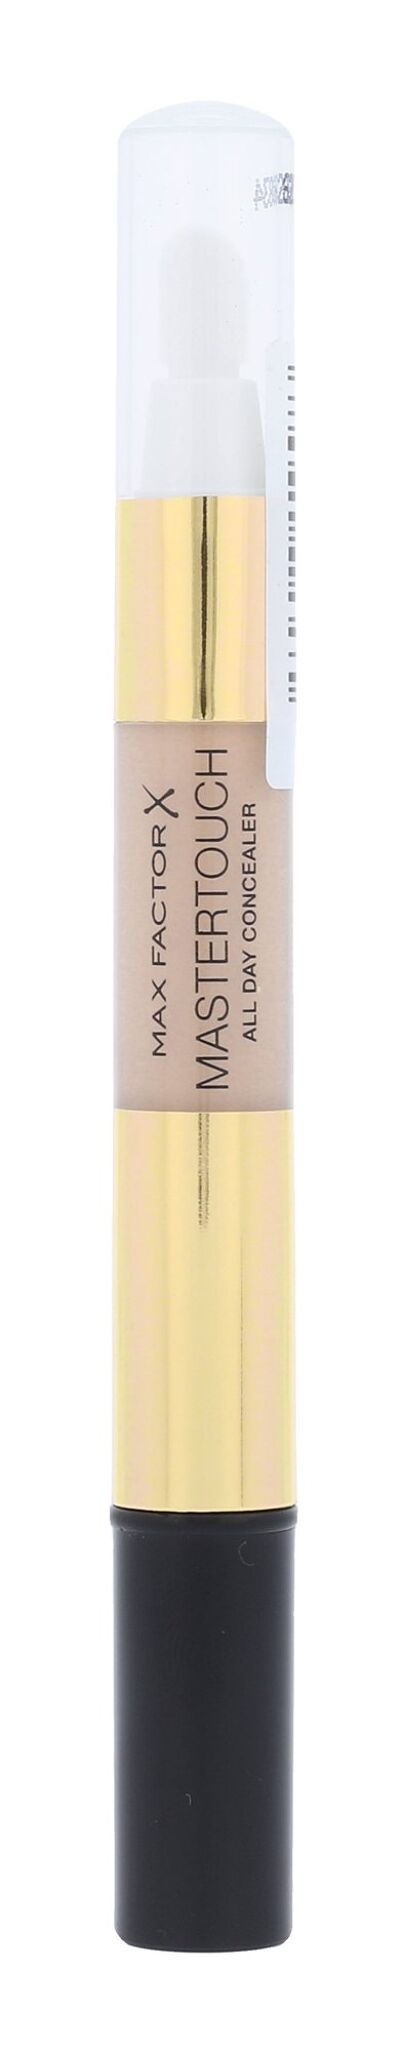 Max Factor Mastertouch Cosmetic 1,5ml 309 Beige